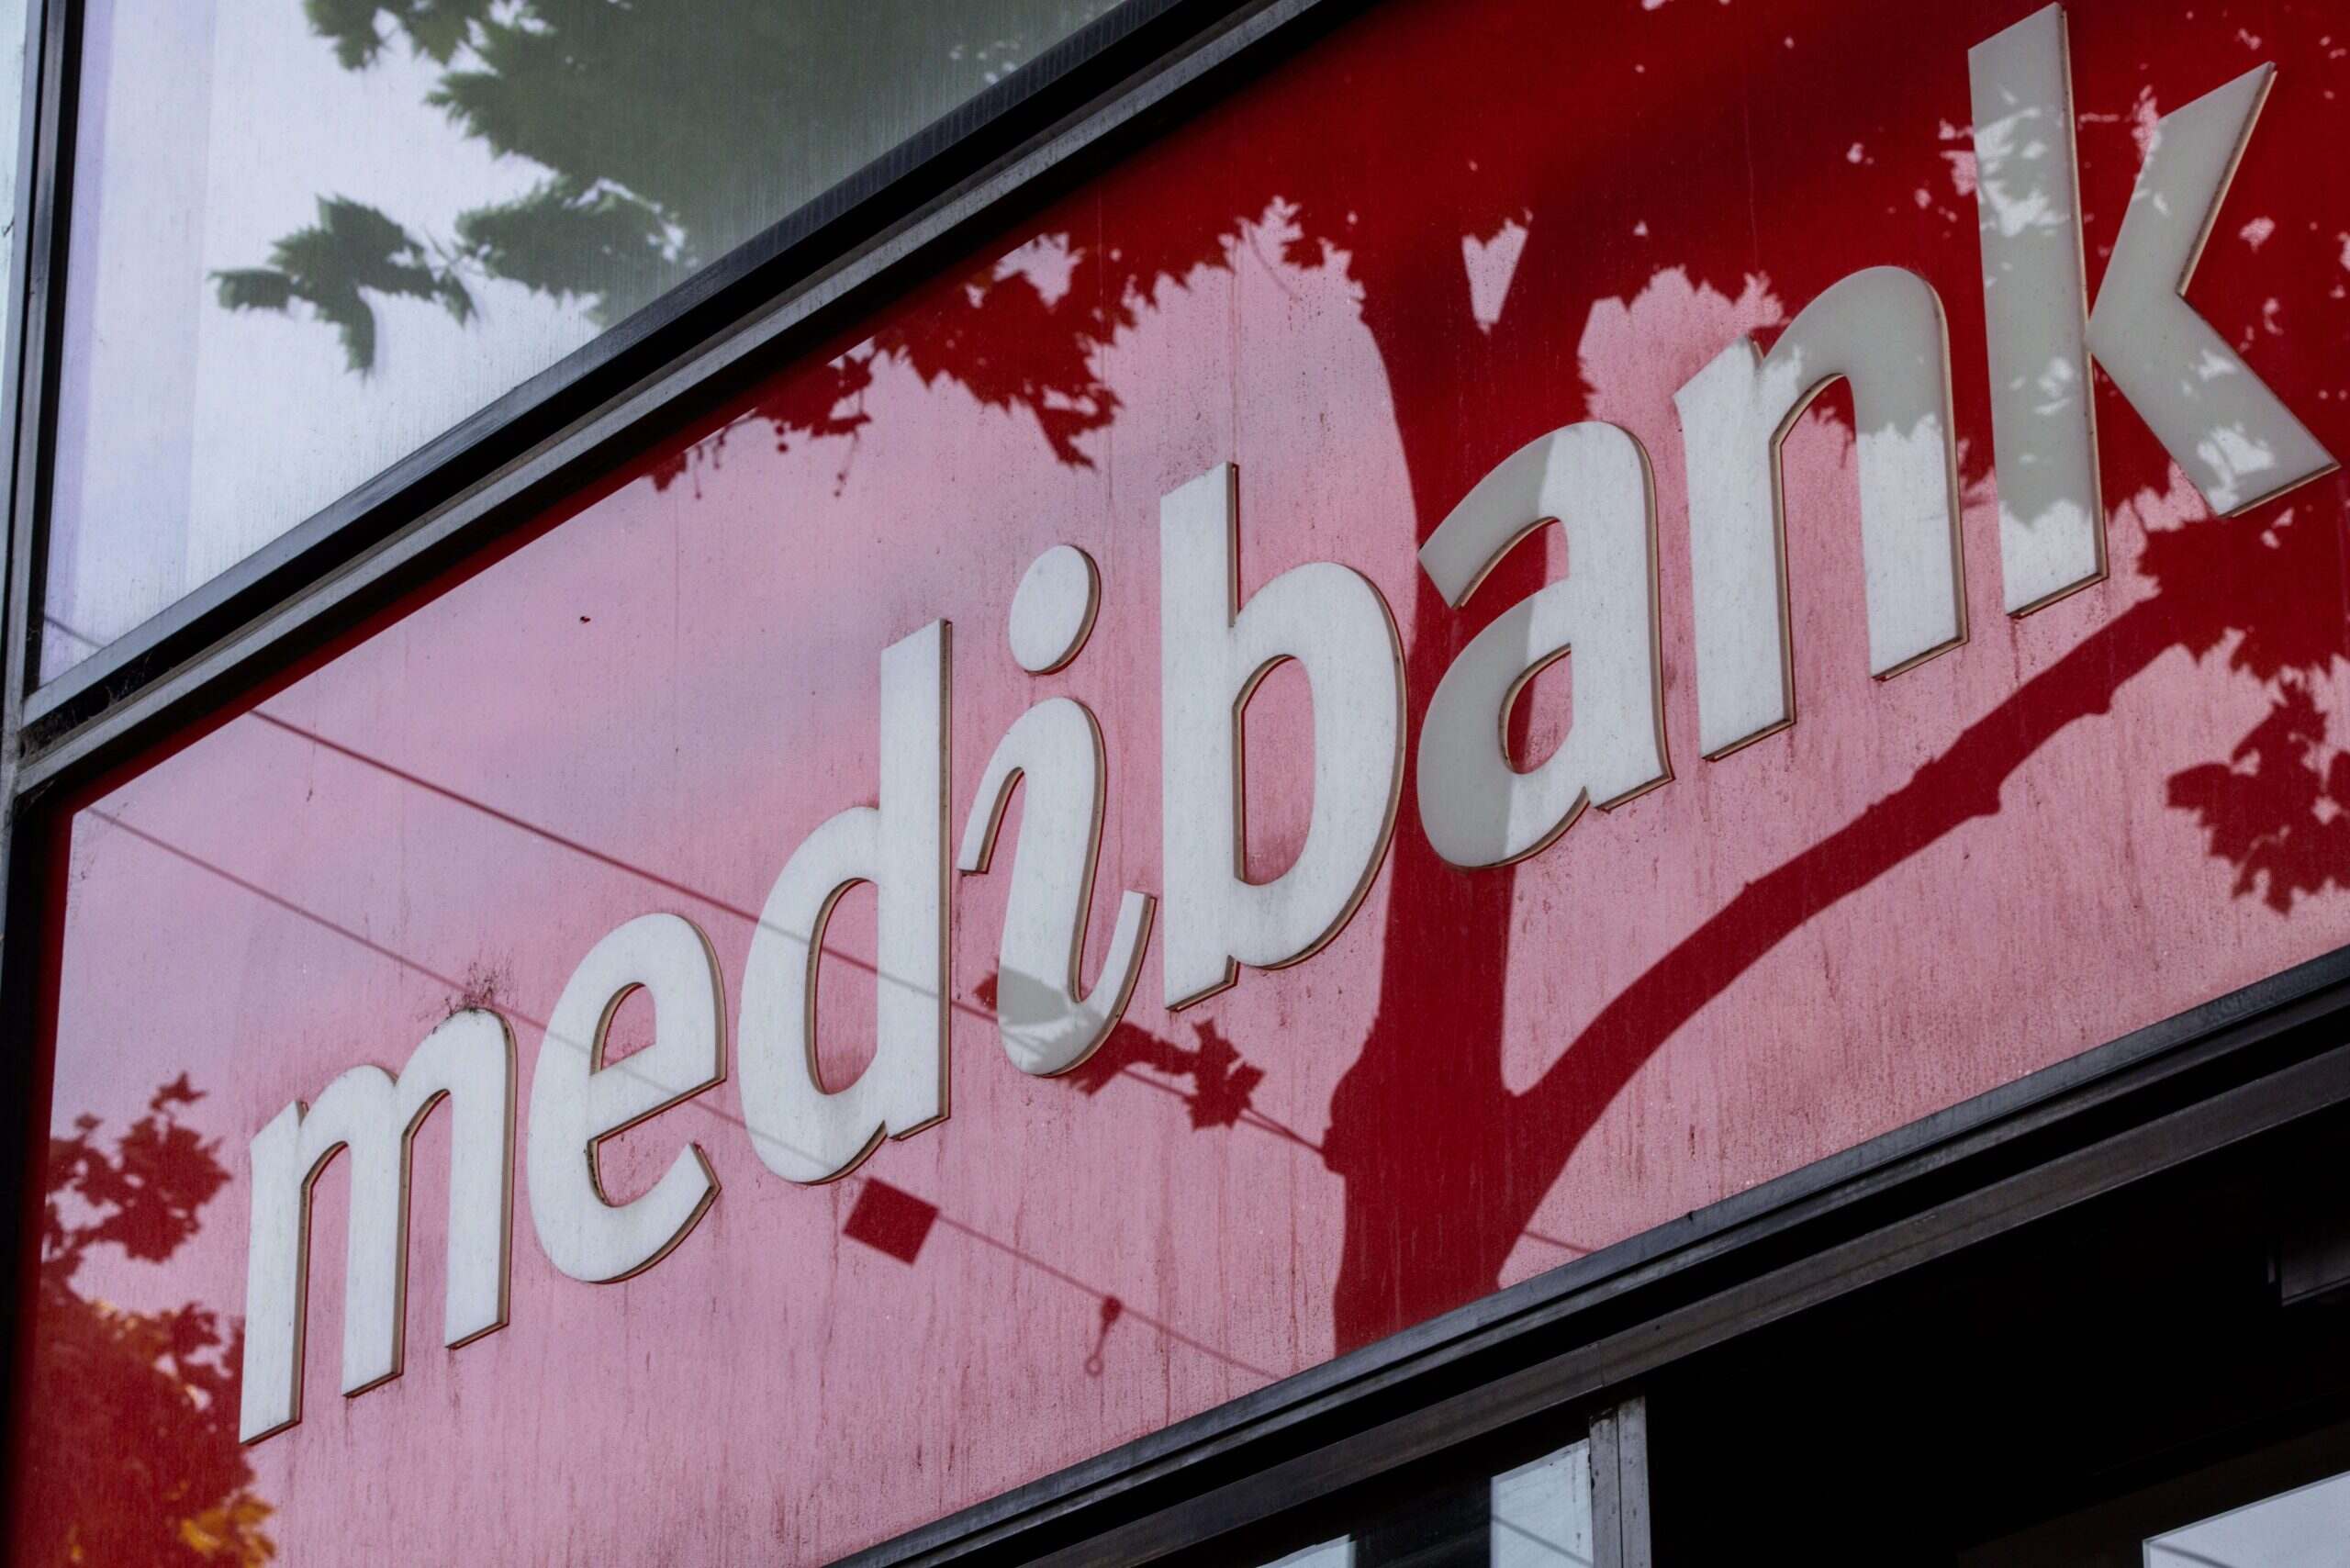 US Imposes Sanctions On Russian Citizen For Medibank Ransomware Attack